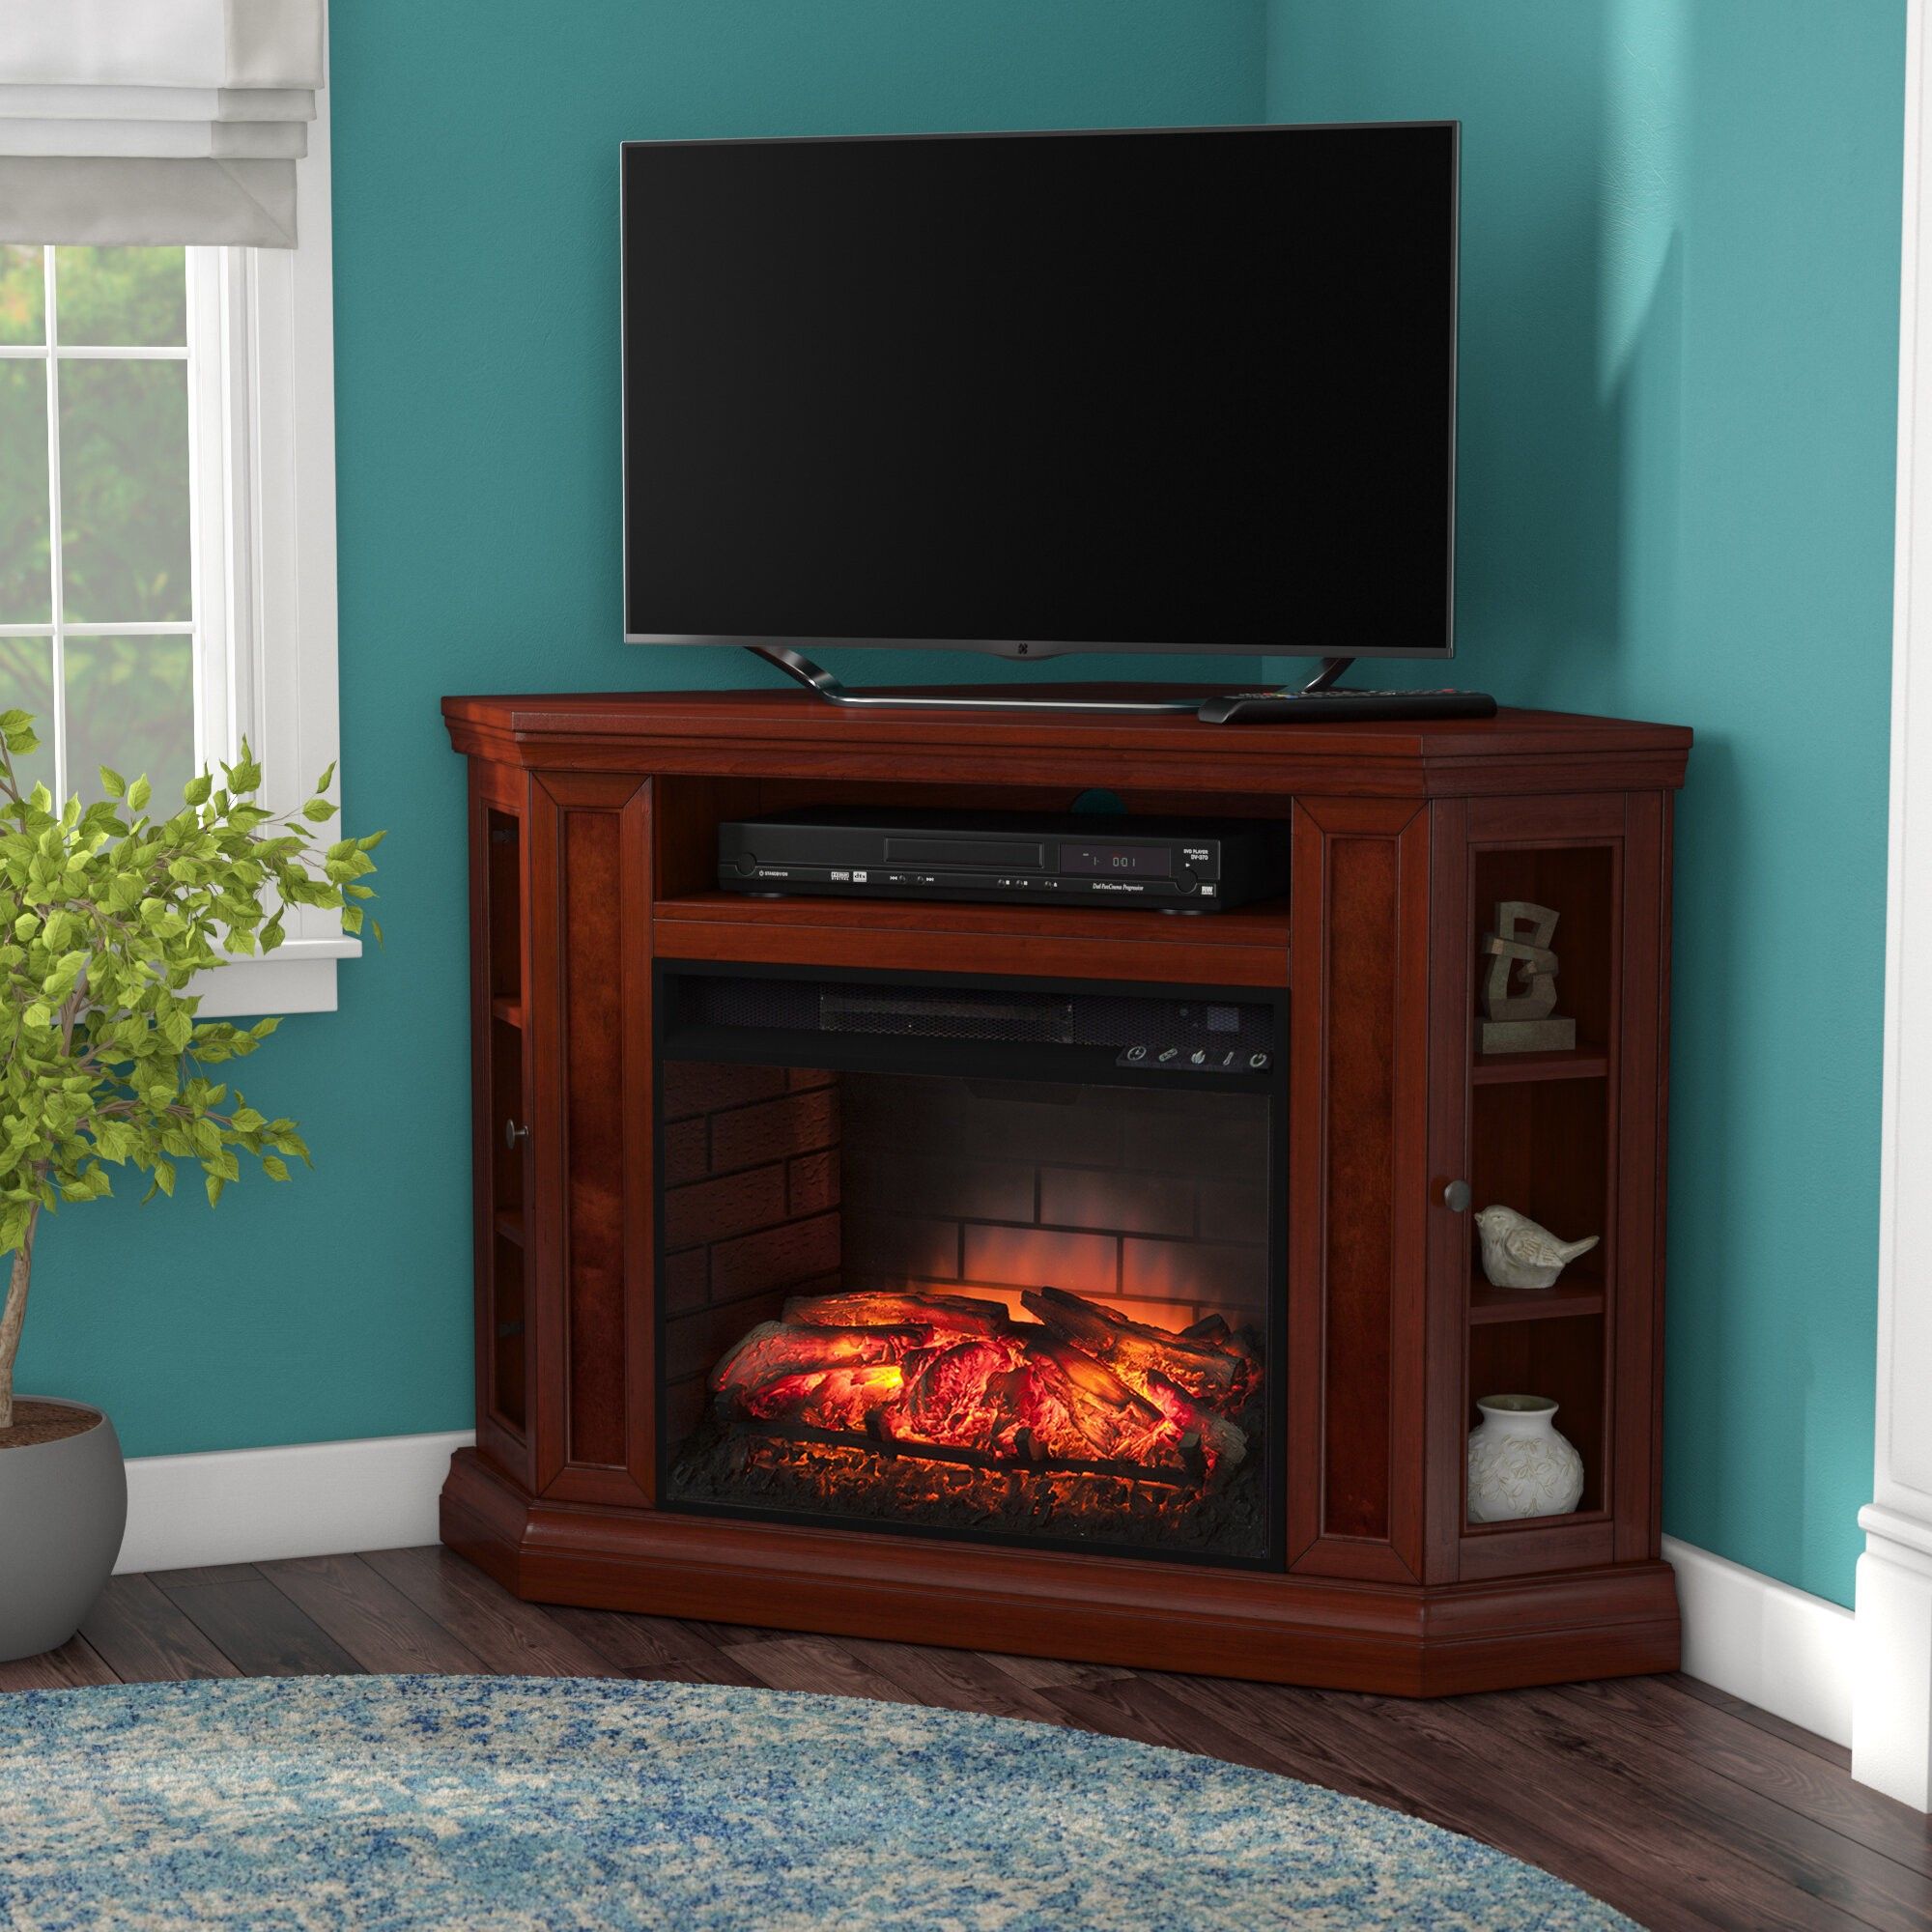 10 Best Corner Tv Stands For 2021 – Ideas On Foter Intended For Wood Tv Floor Stands (View 5 of 15)